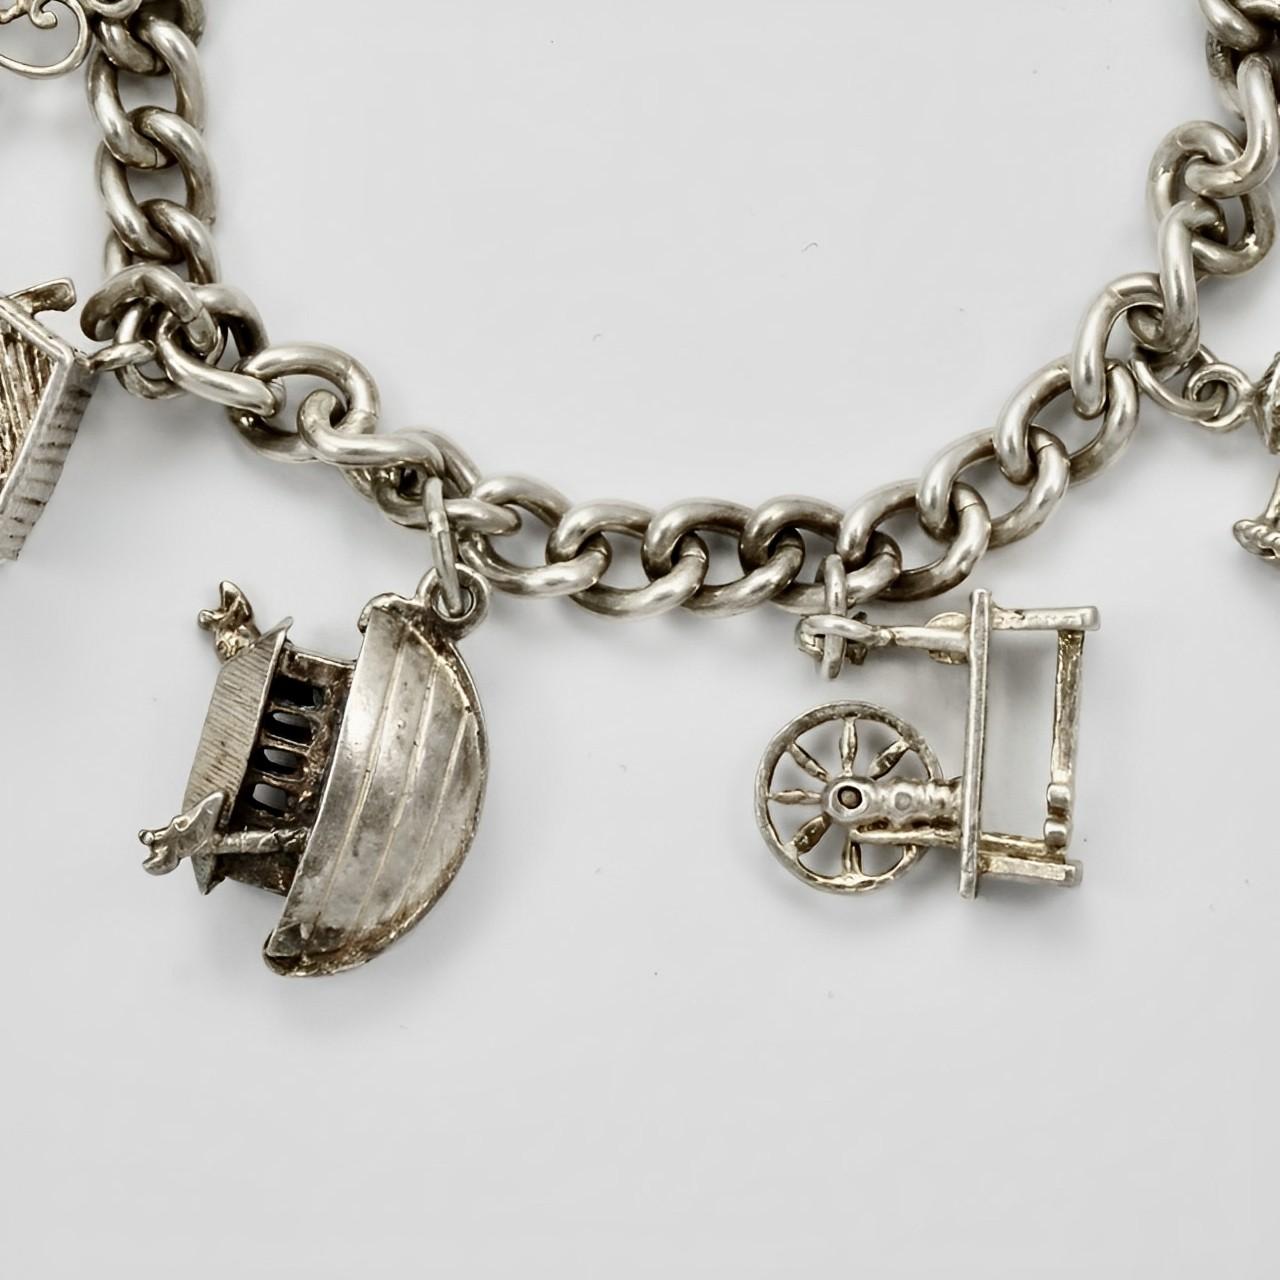 what to do with old charm bracelets